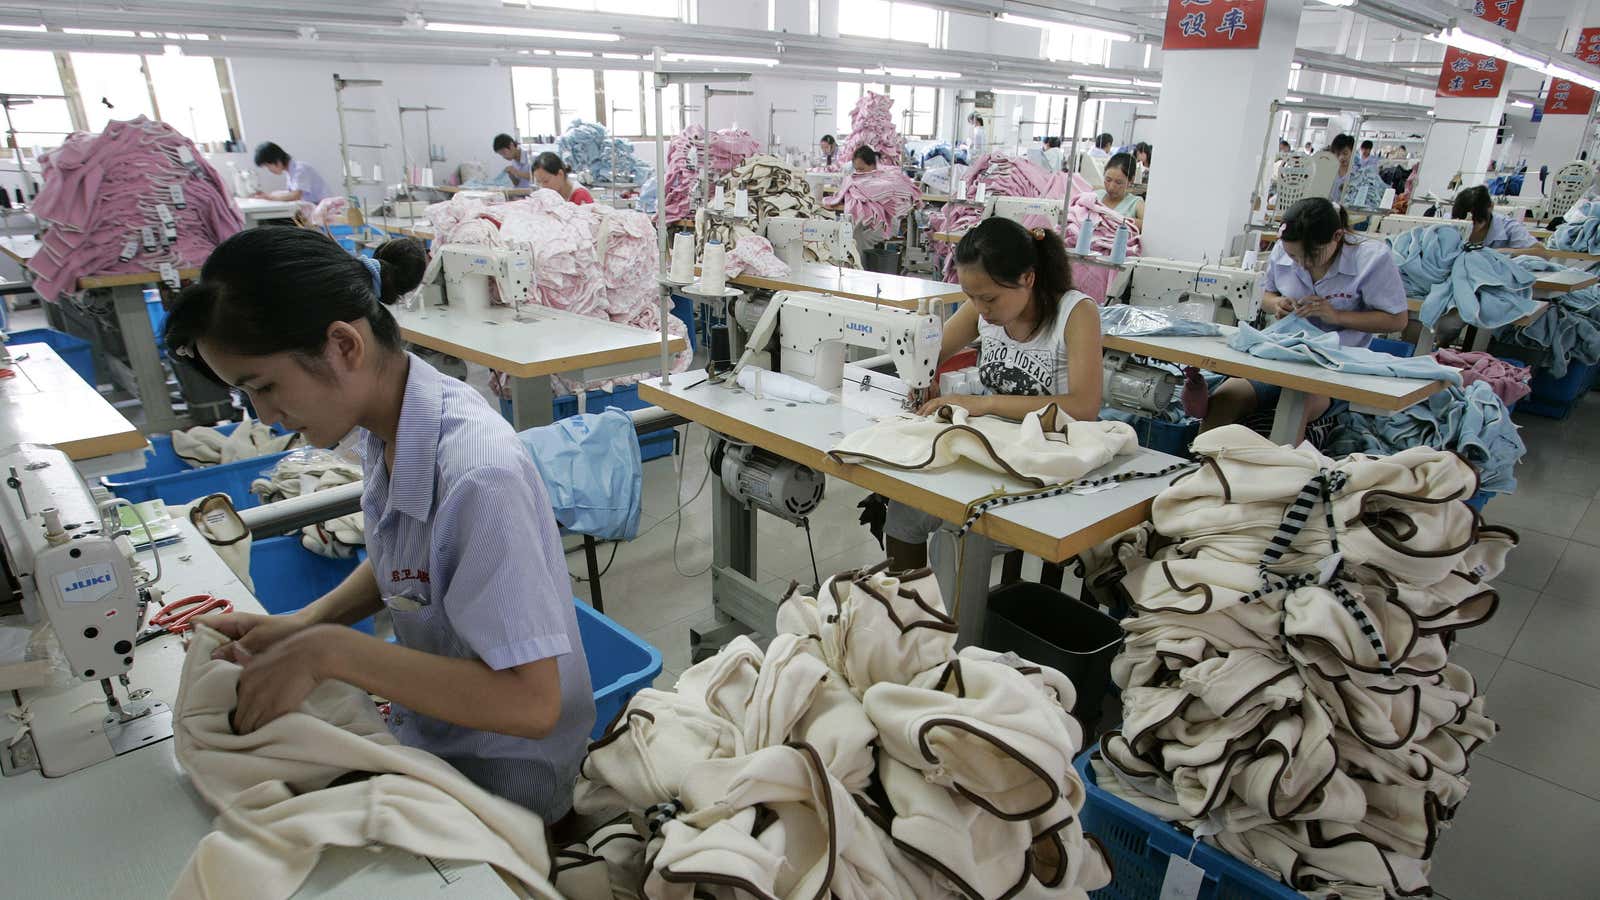 Labourers work on garments for export at the production line of a garment factory in Shanghai August 27, 2007. China on Monday blamed differing national…